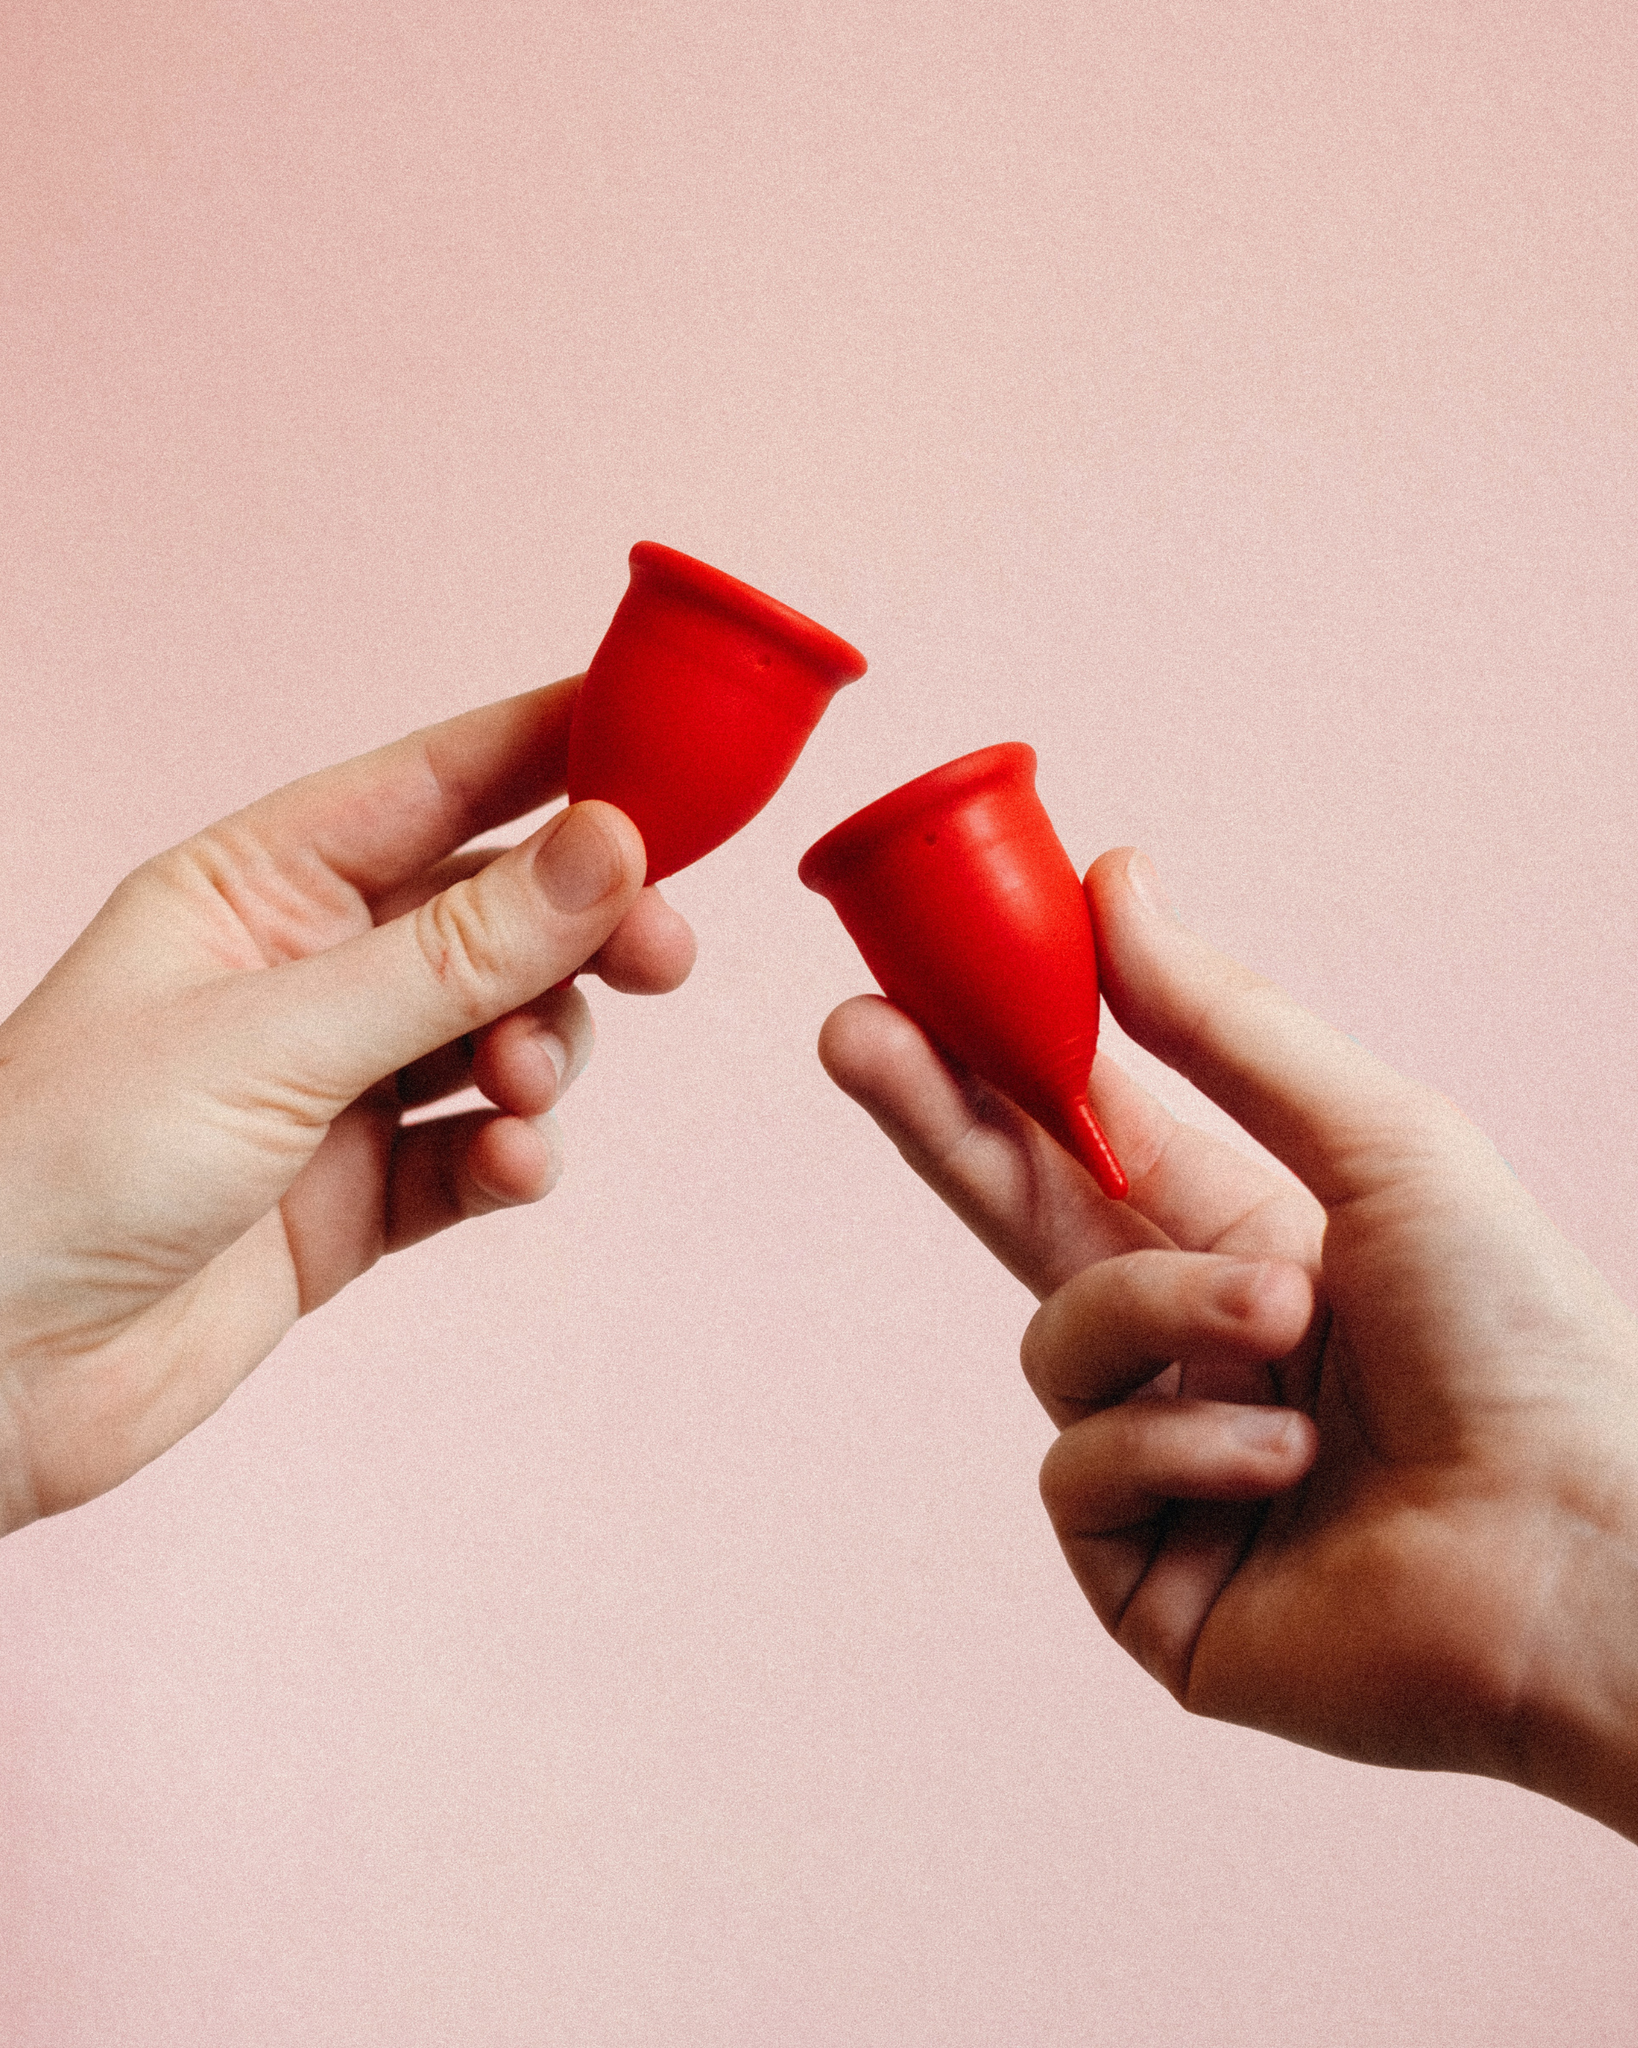 Best period products for PCOS: hands holding unused red menstrual cups